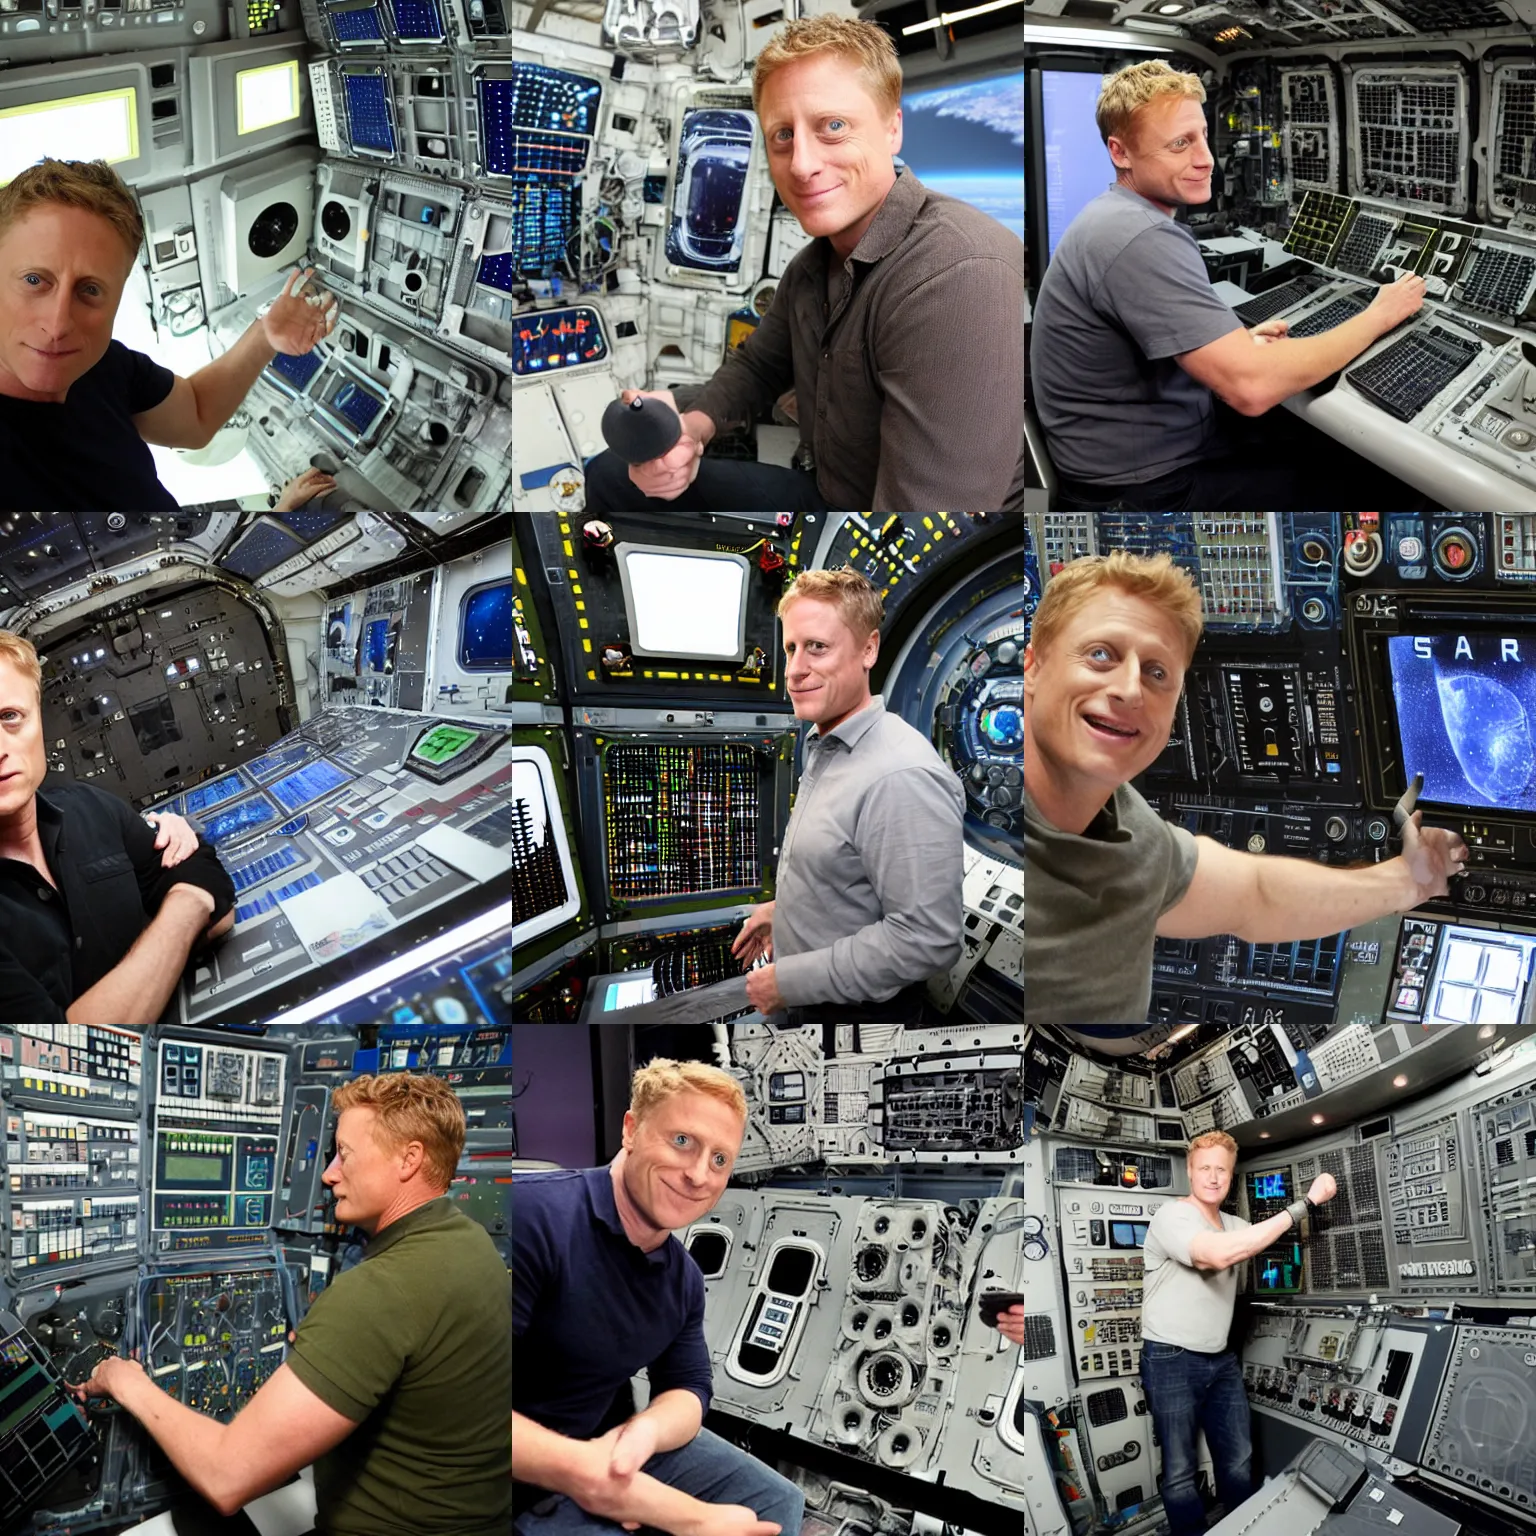 Prompt: alan wray tudyk at the control panel of the spacecraft